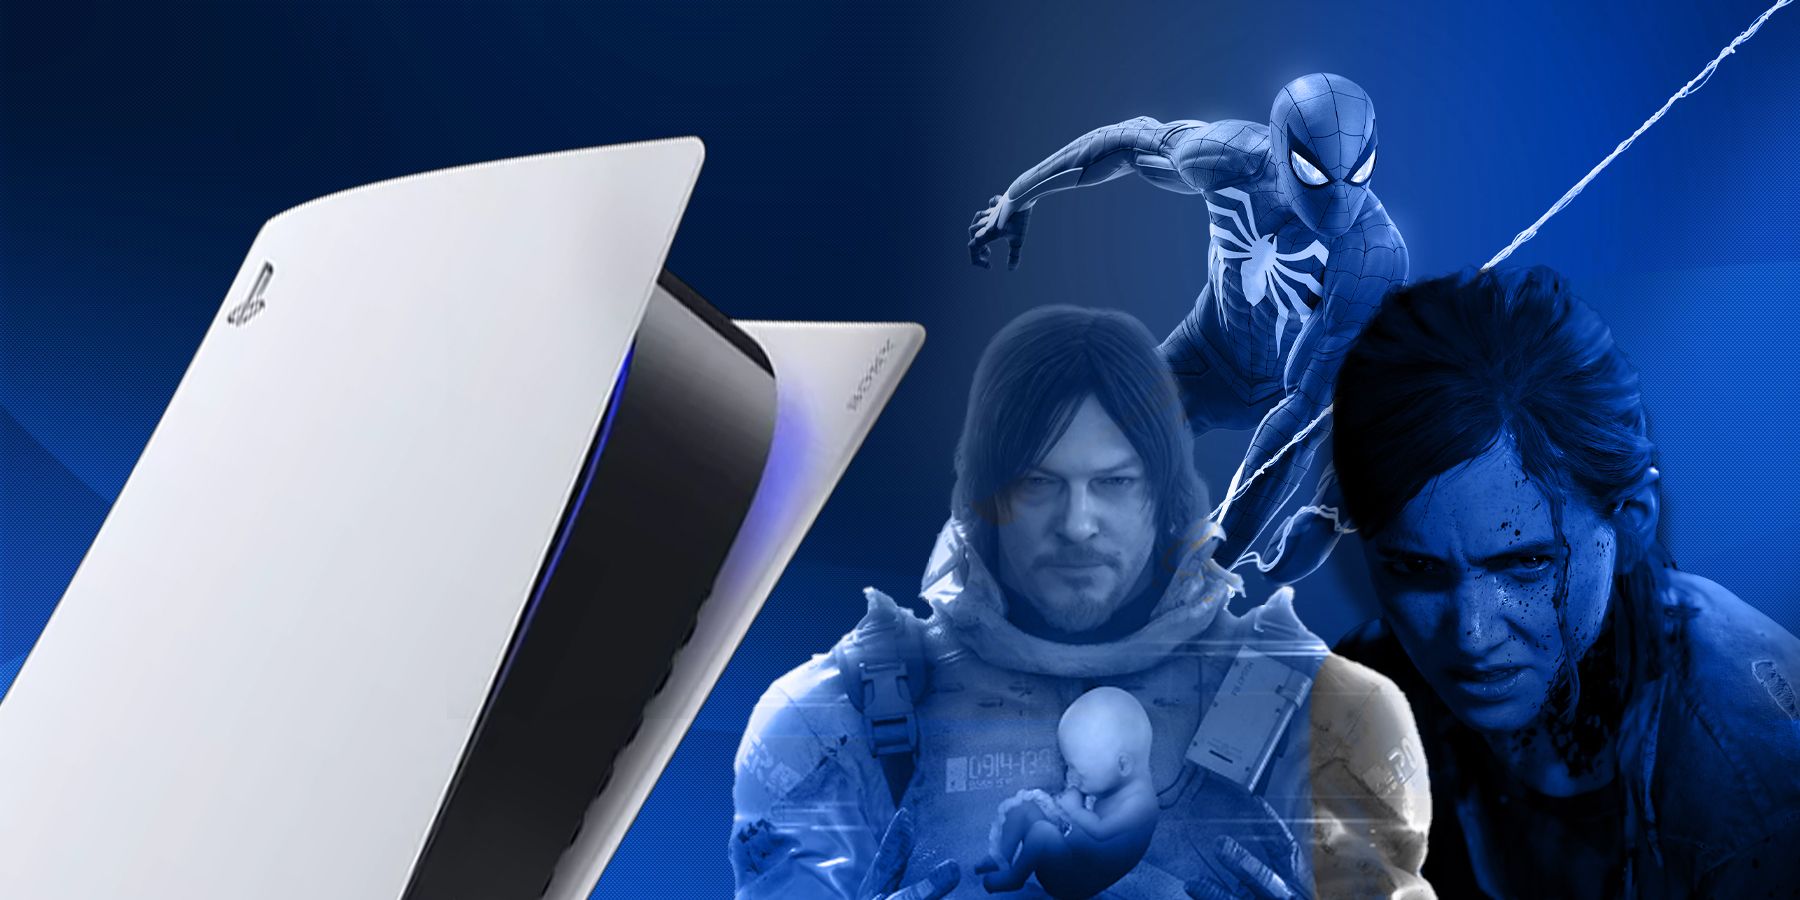 PlayStation Showcase officially scheduled for May 24